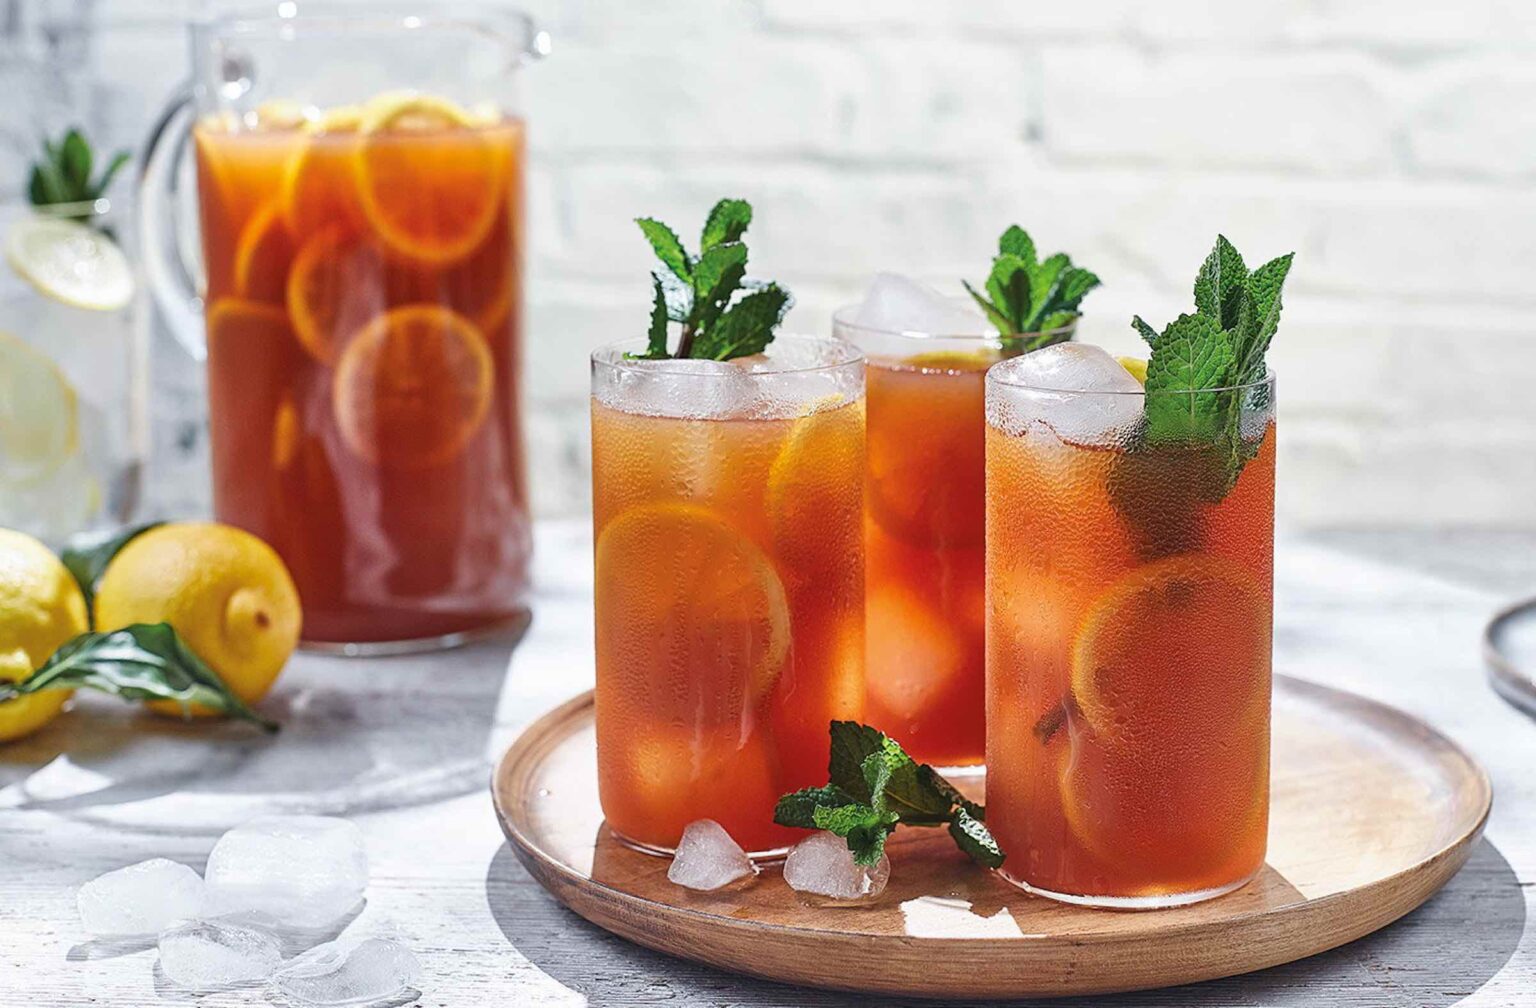 Today is National Iced Tea Day, a celebration of this refreshing summer classic. Grab your pitchers and dive into these delicious iced tea recipes.